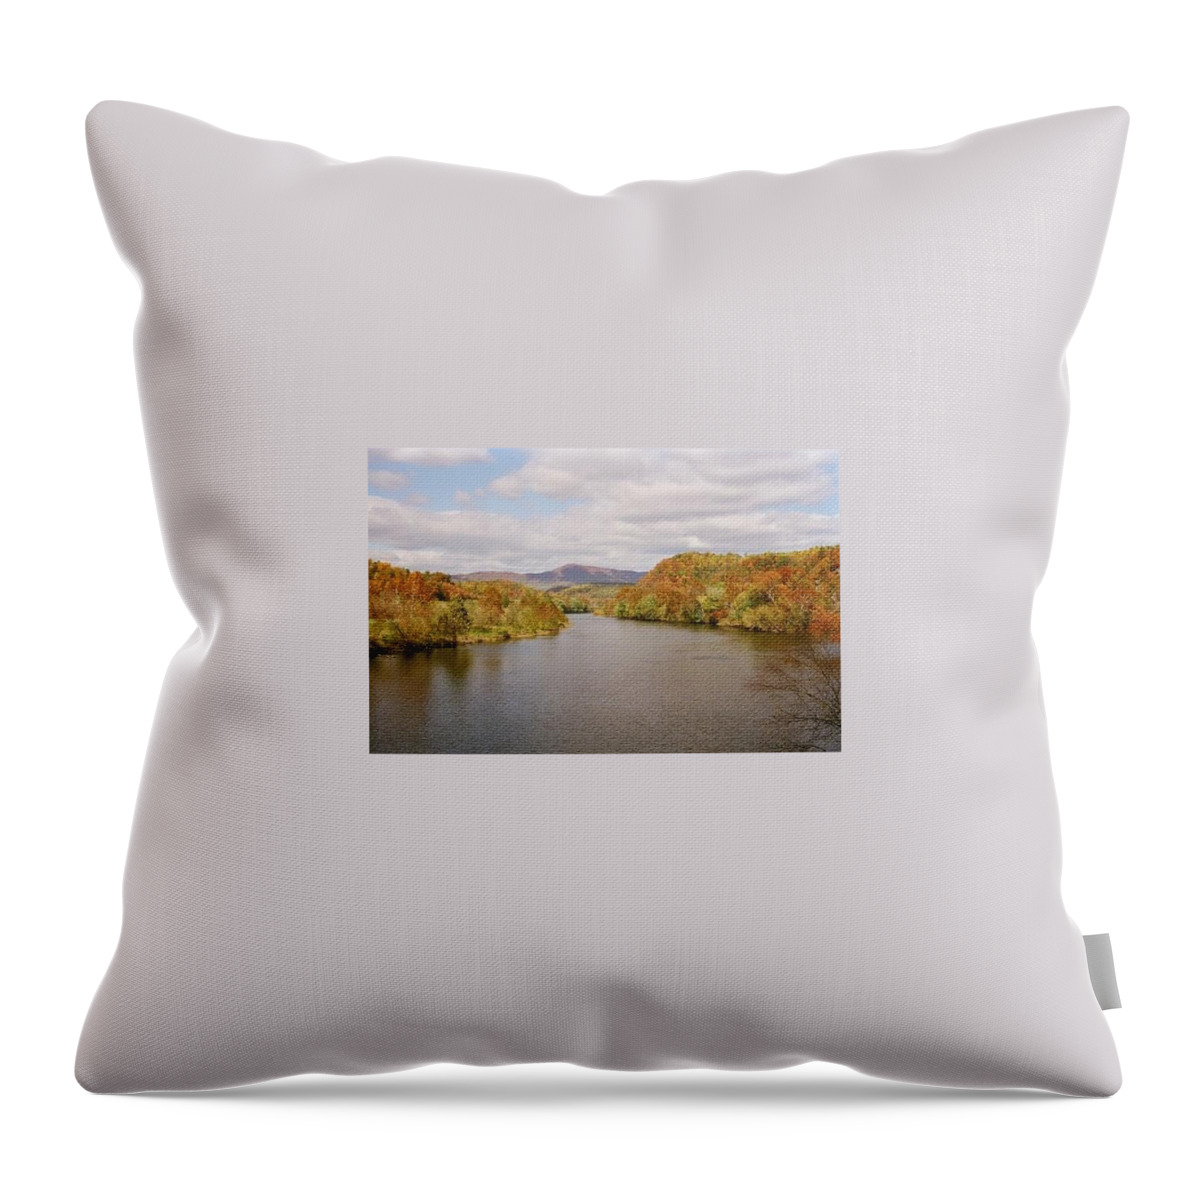  Throw Pillow featuring the photograph James River Fall Time by Stephen Dorton